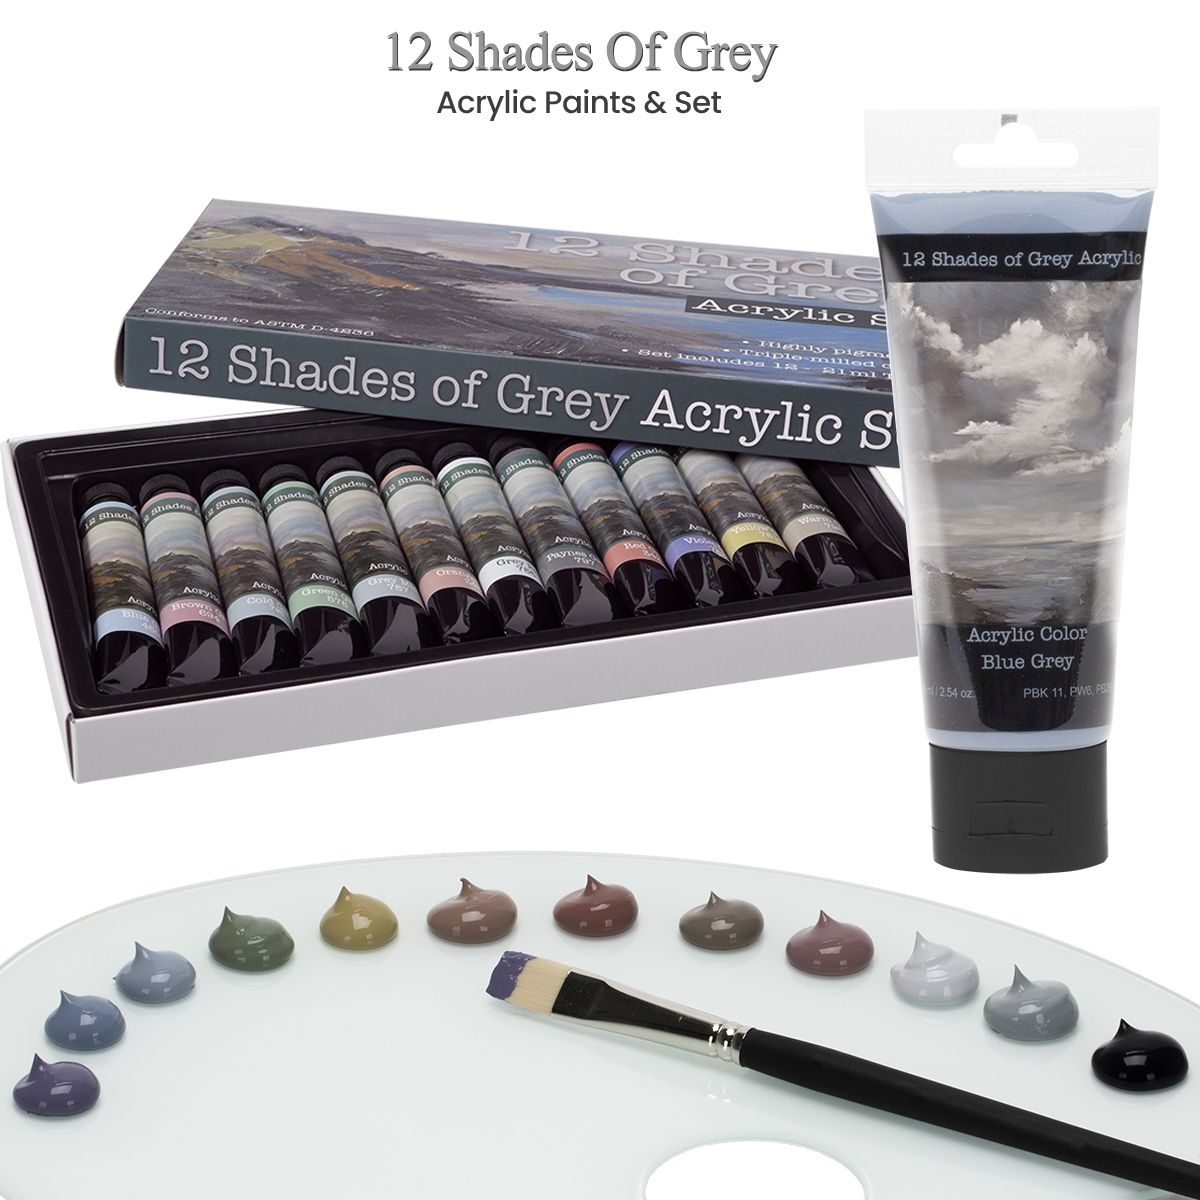 12 Shades of Grey Acrylic Paint Colors & Set of 12